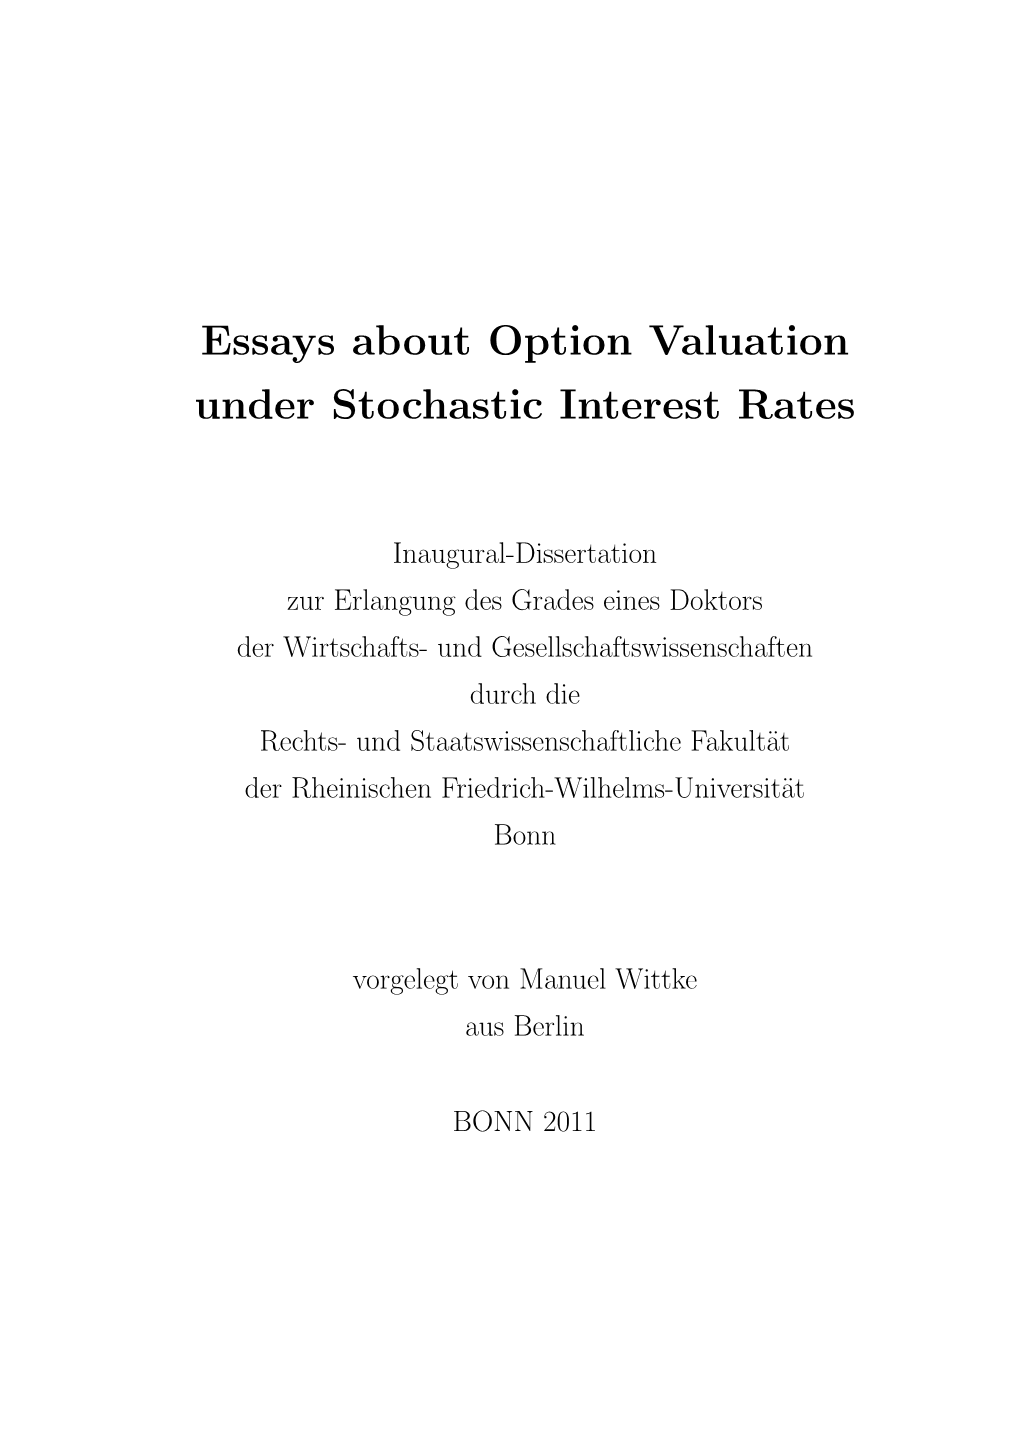 Essays About Option Valuation Under Stochastic Interest Rates